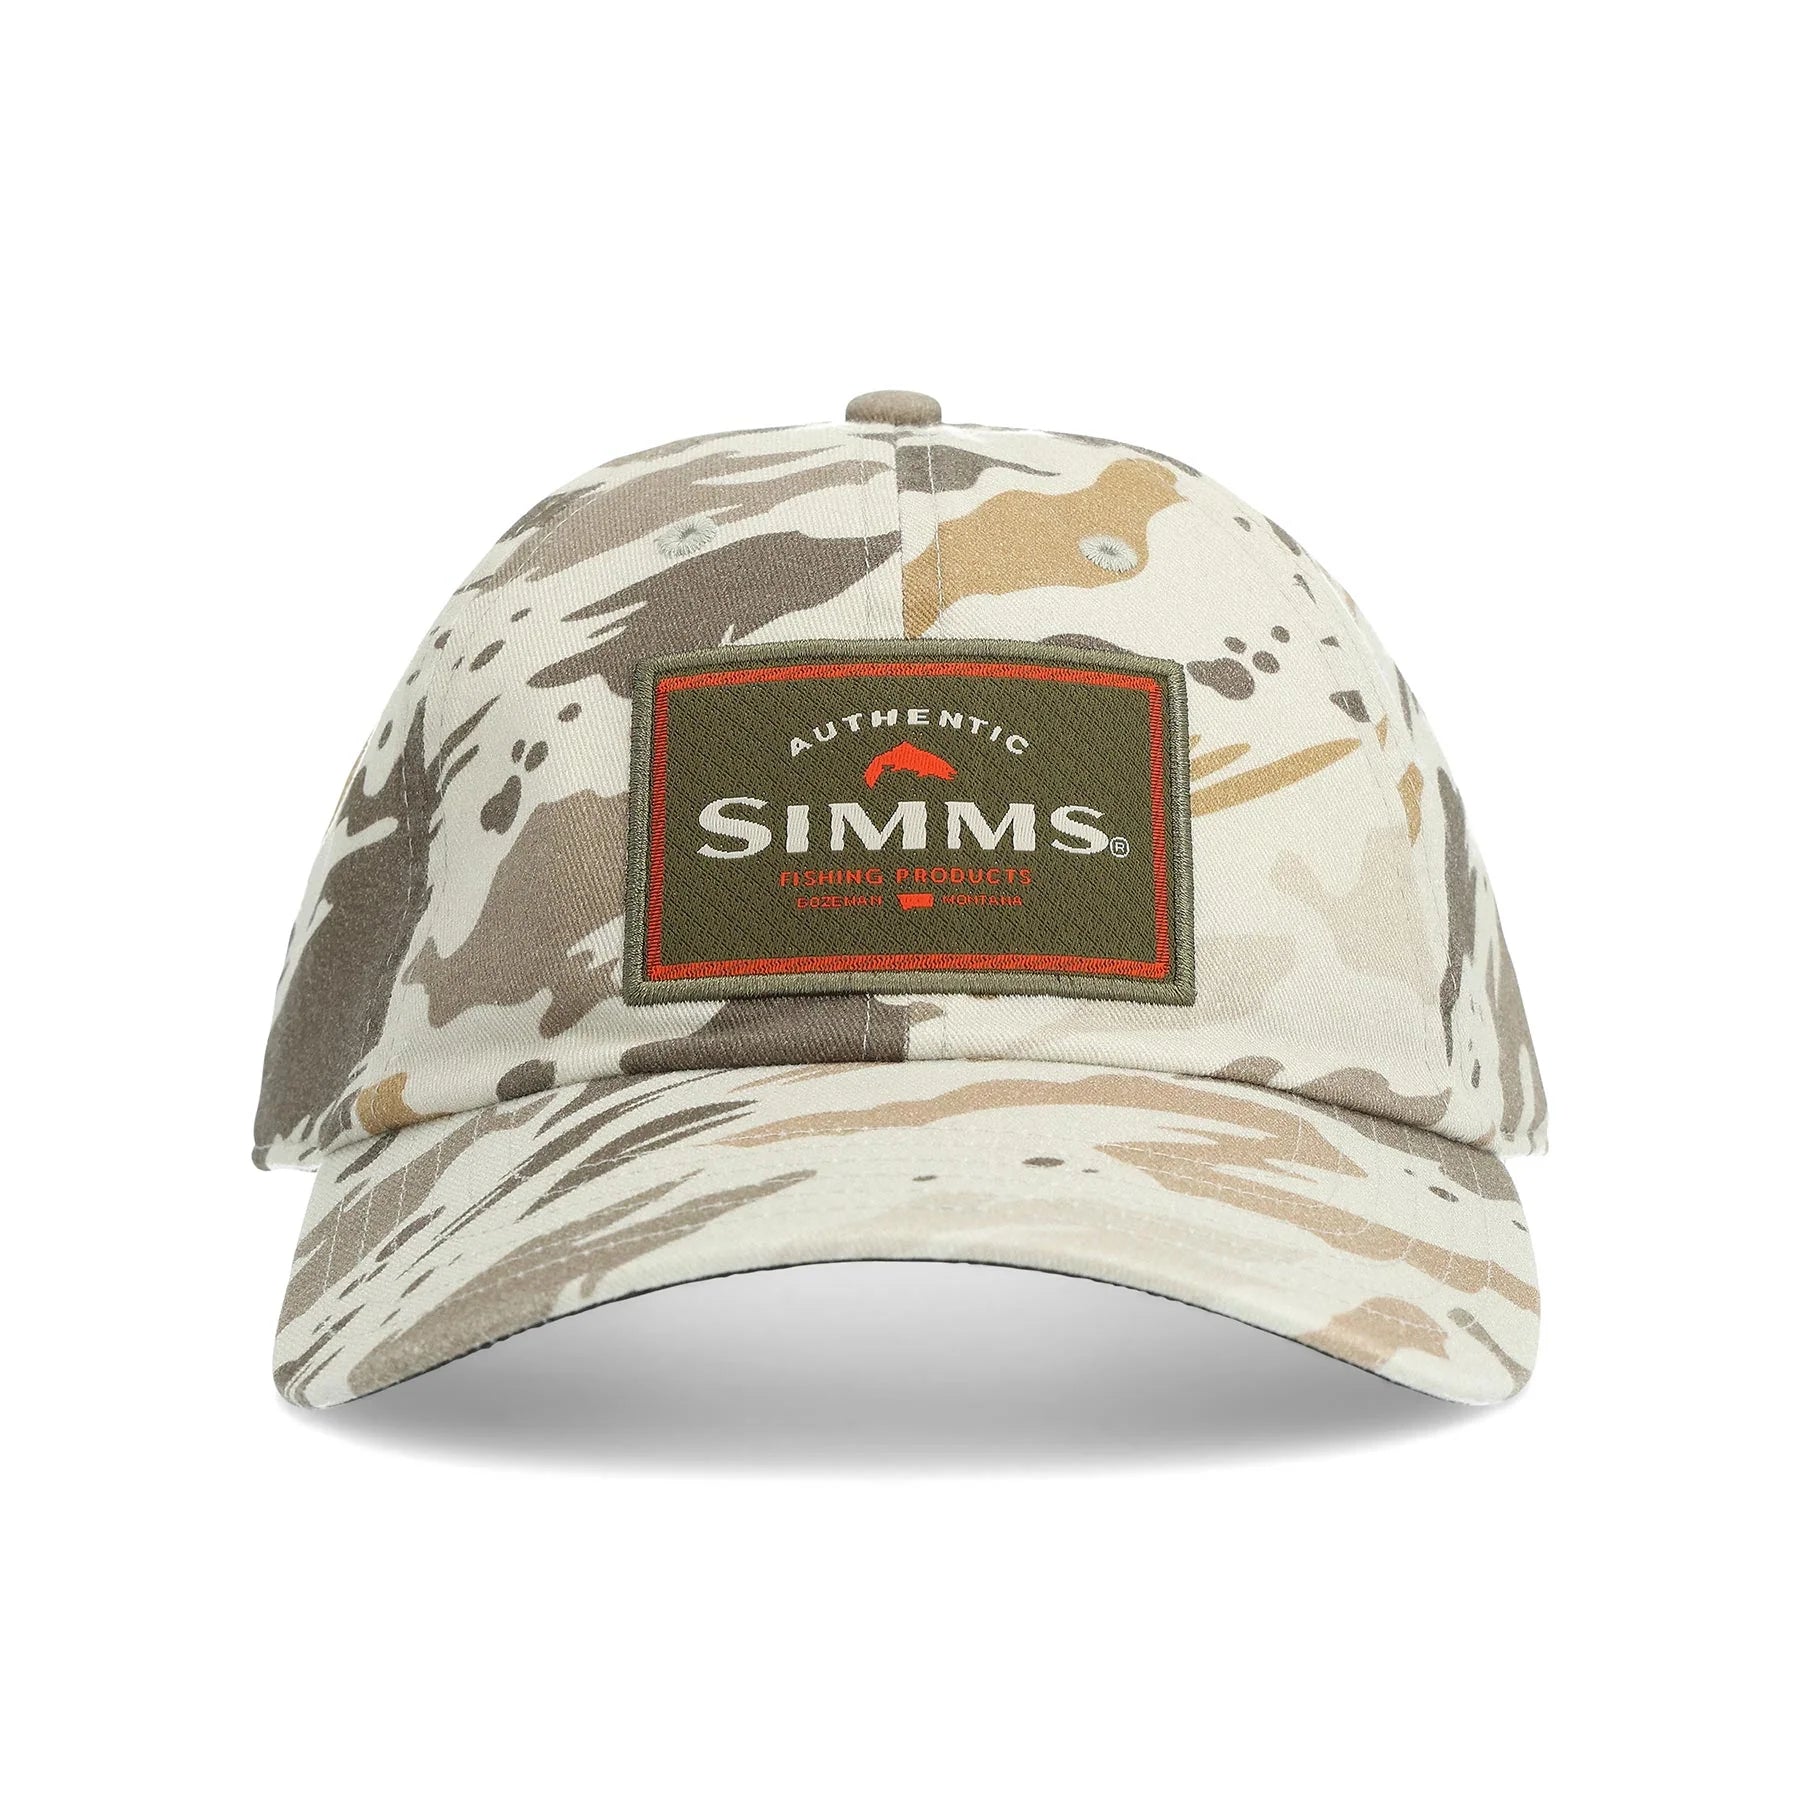 Simms Single Haul Cap - Compleat Angler Nedlands Pro Tackle